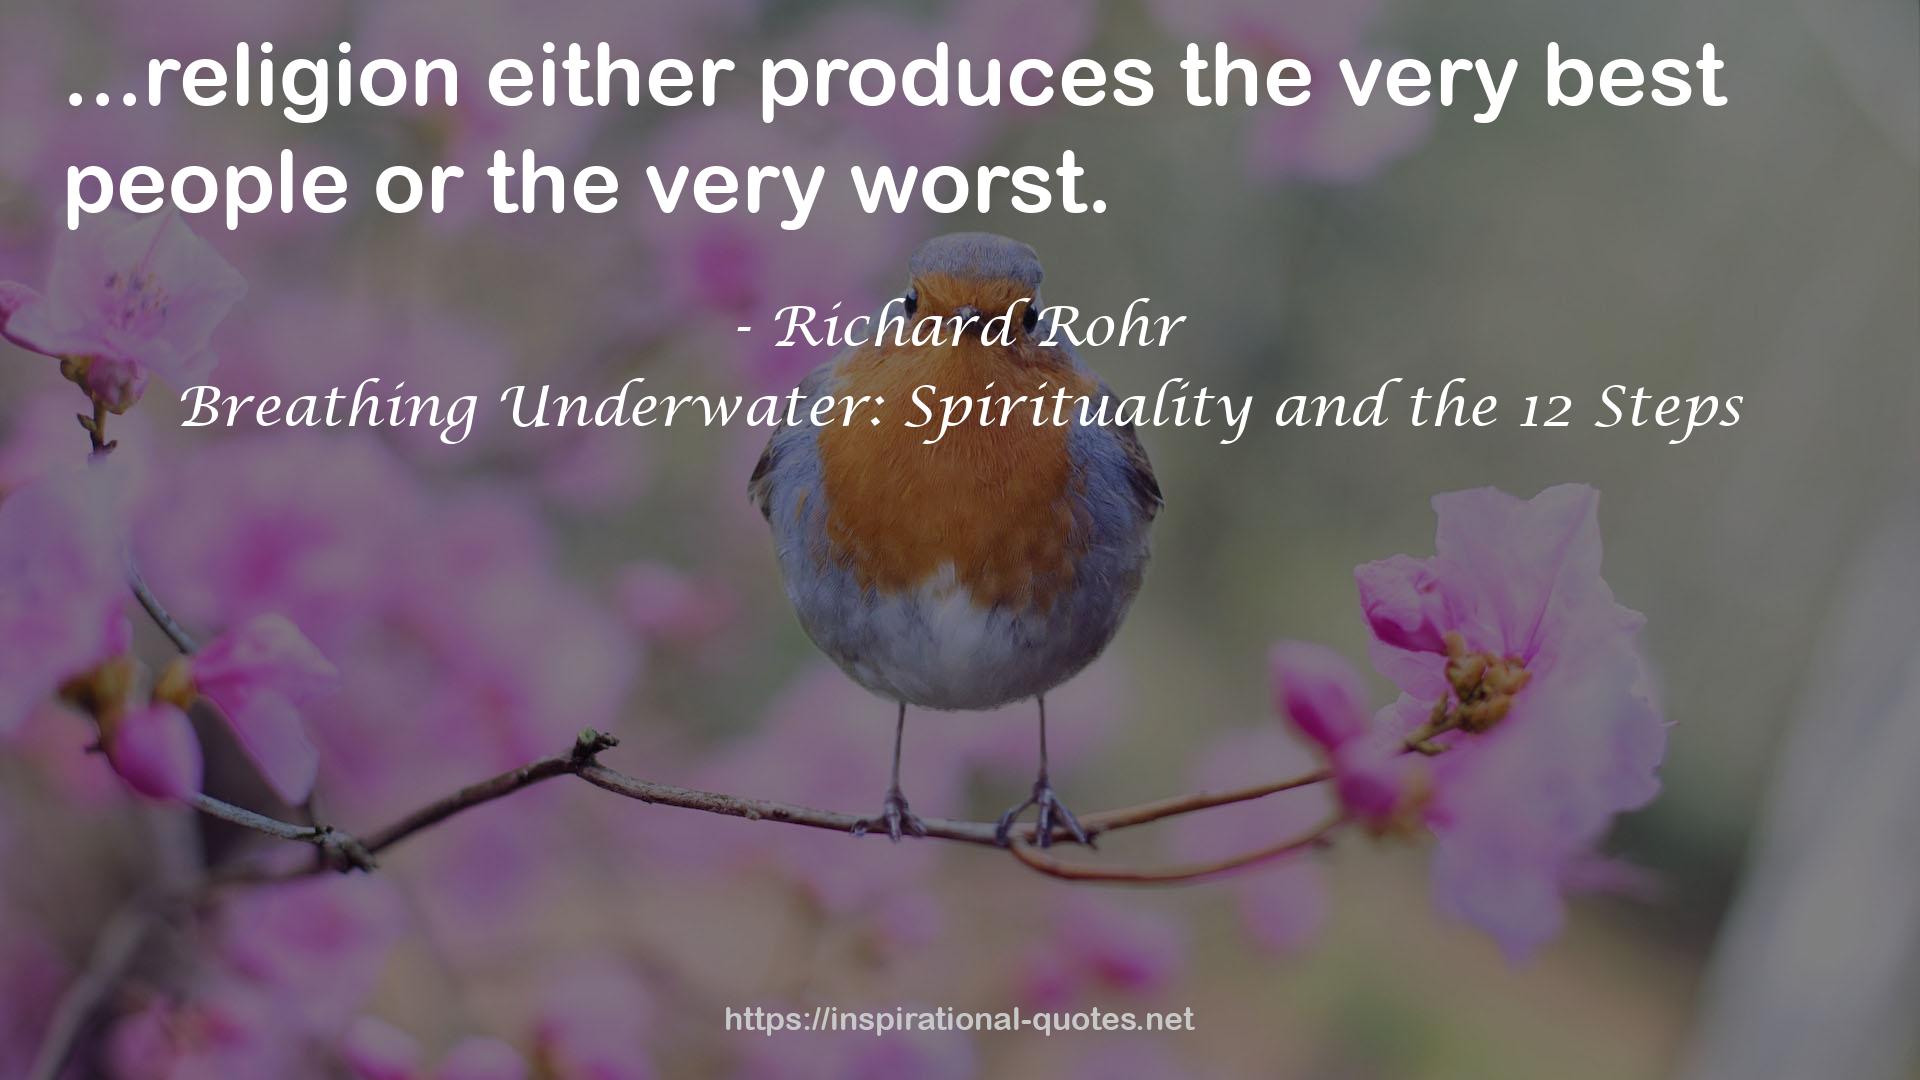 Breathing Underwater: Spirituality and the 12 Steps QUOTES